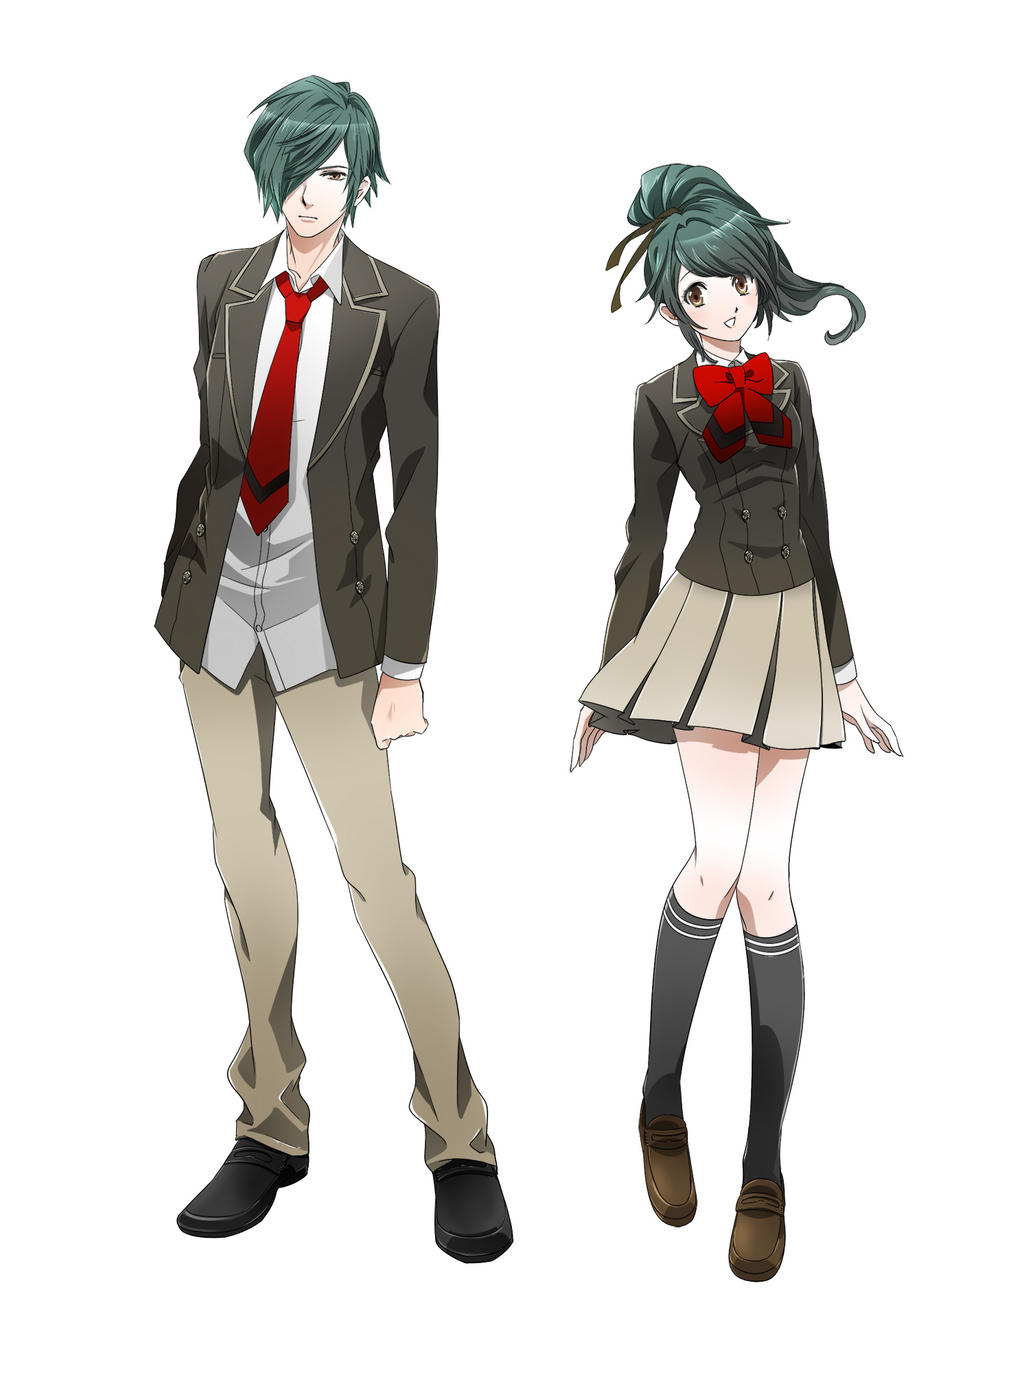 Anime-Style Male and Female School Student